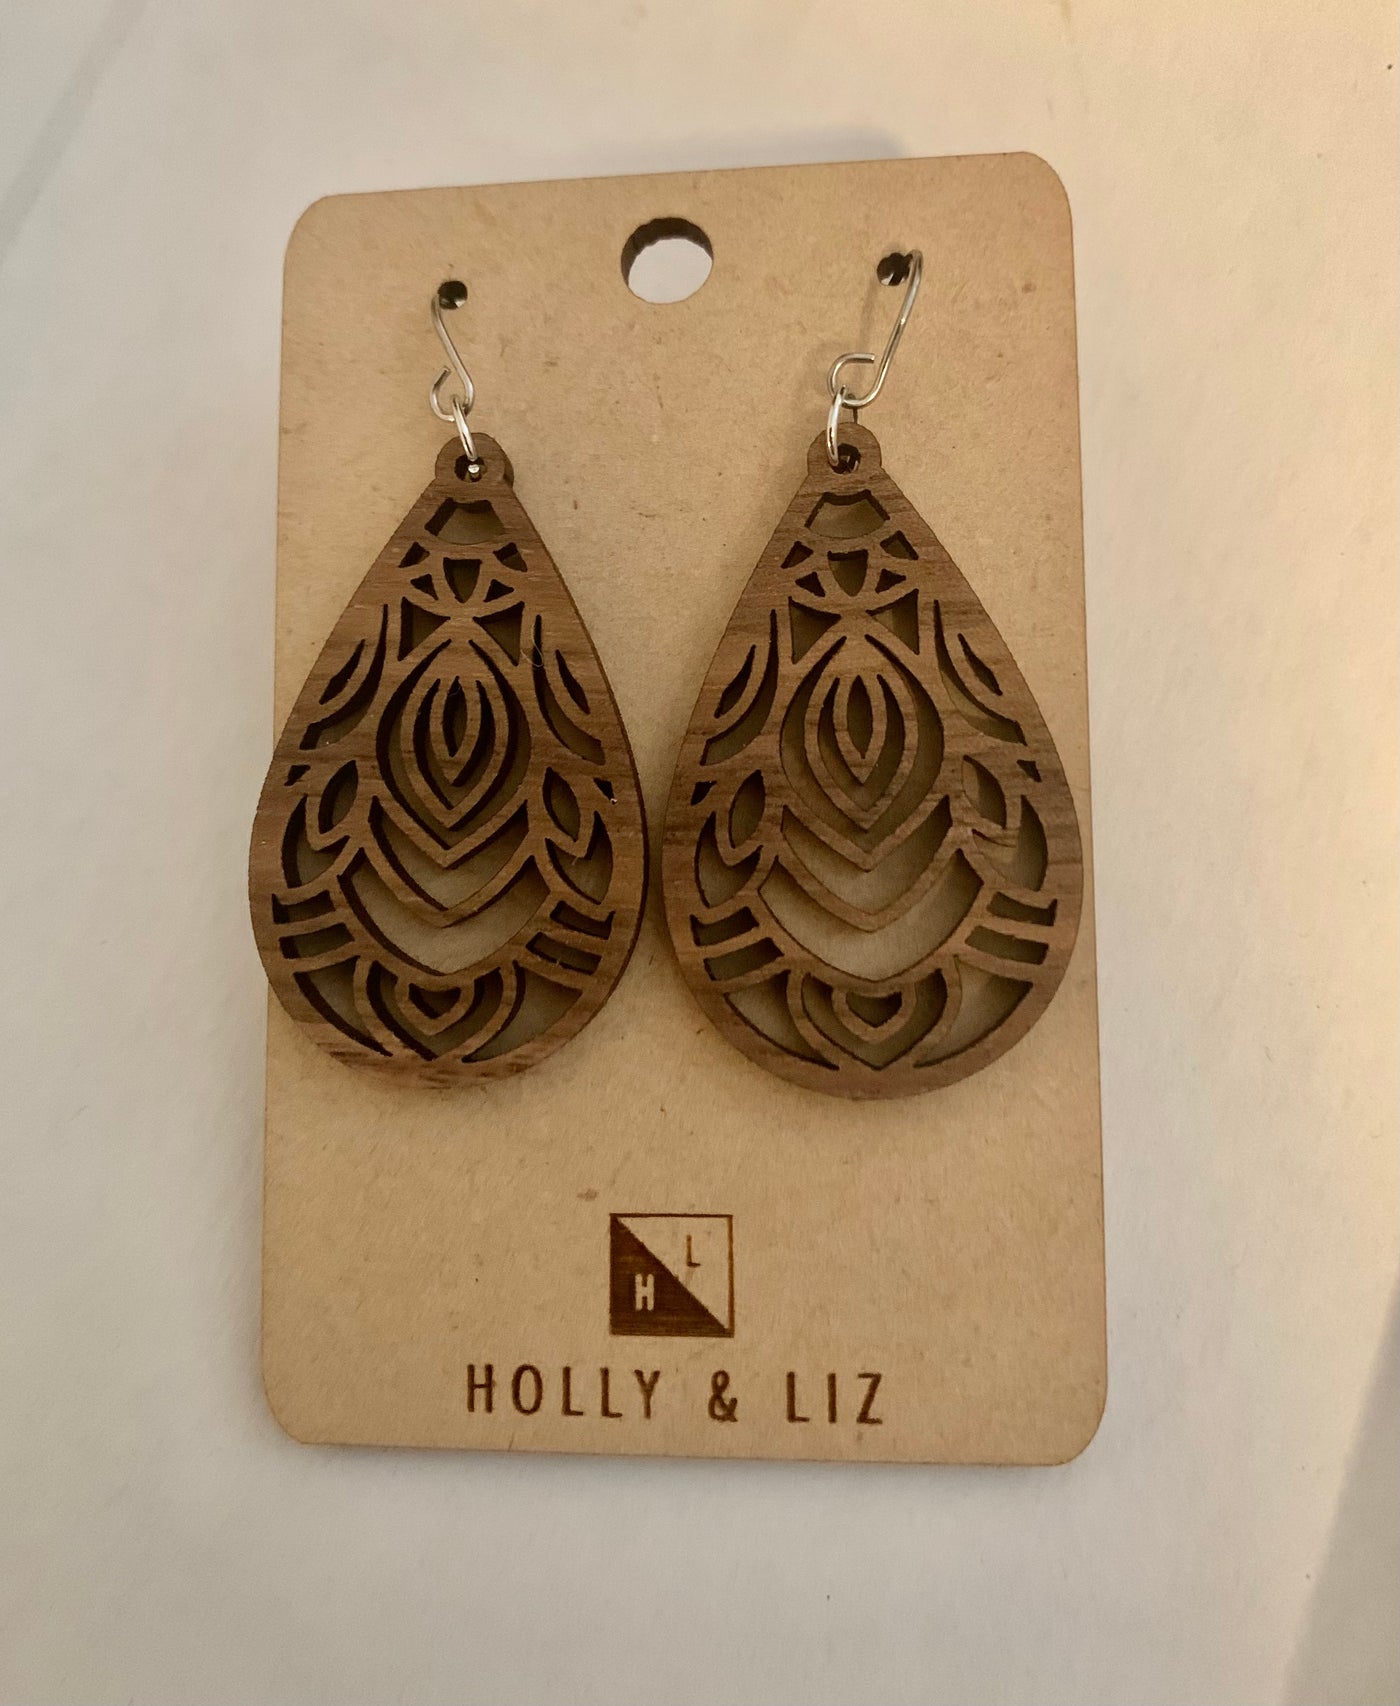 Under His Feathers - Laser Engraved USA Hand-Made Earrings (Walnut Wood) - Joy & Country